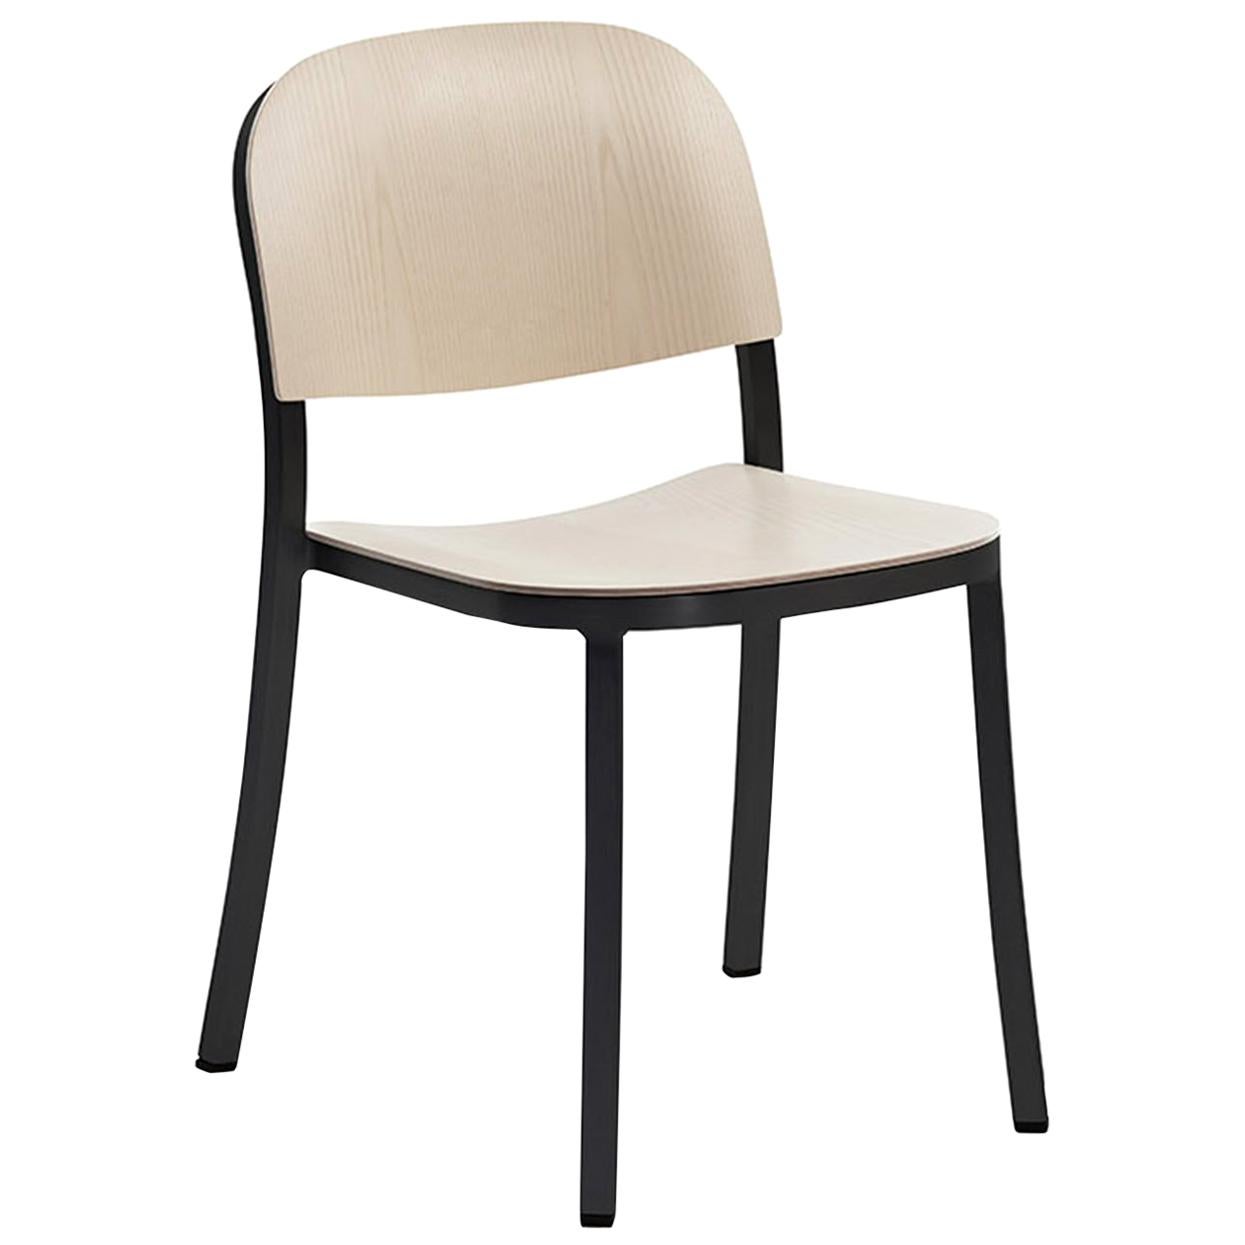 Emeco 1 Inch Stacking Chair in Dark Aluminum and Ash by Jasper Morrison